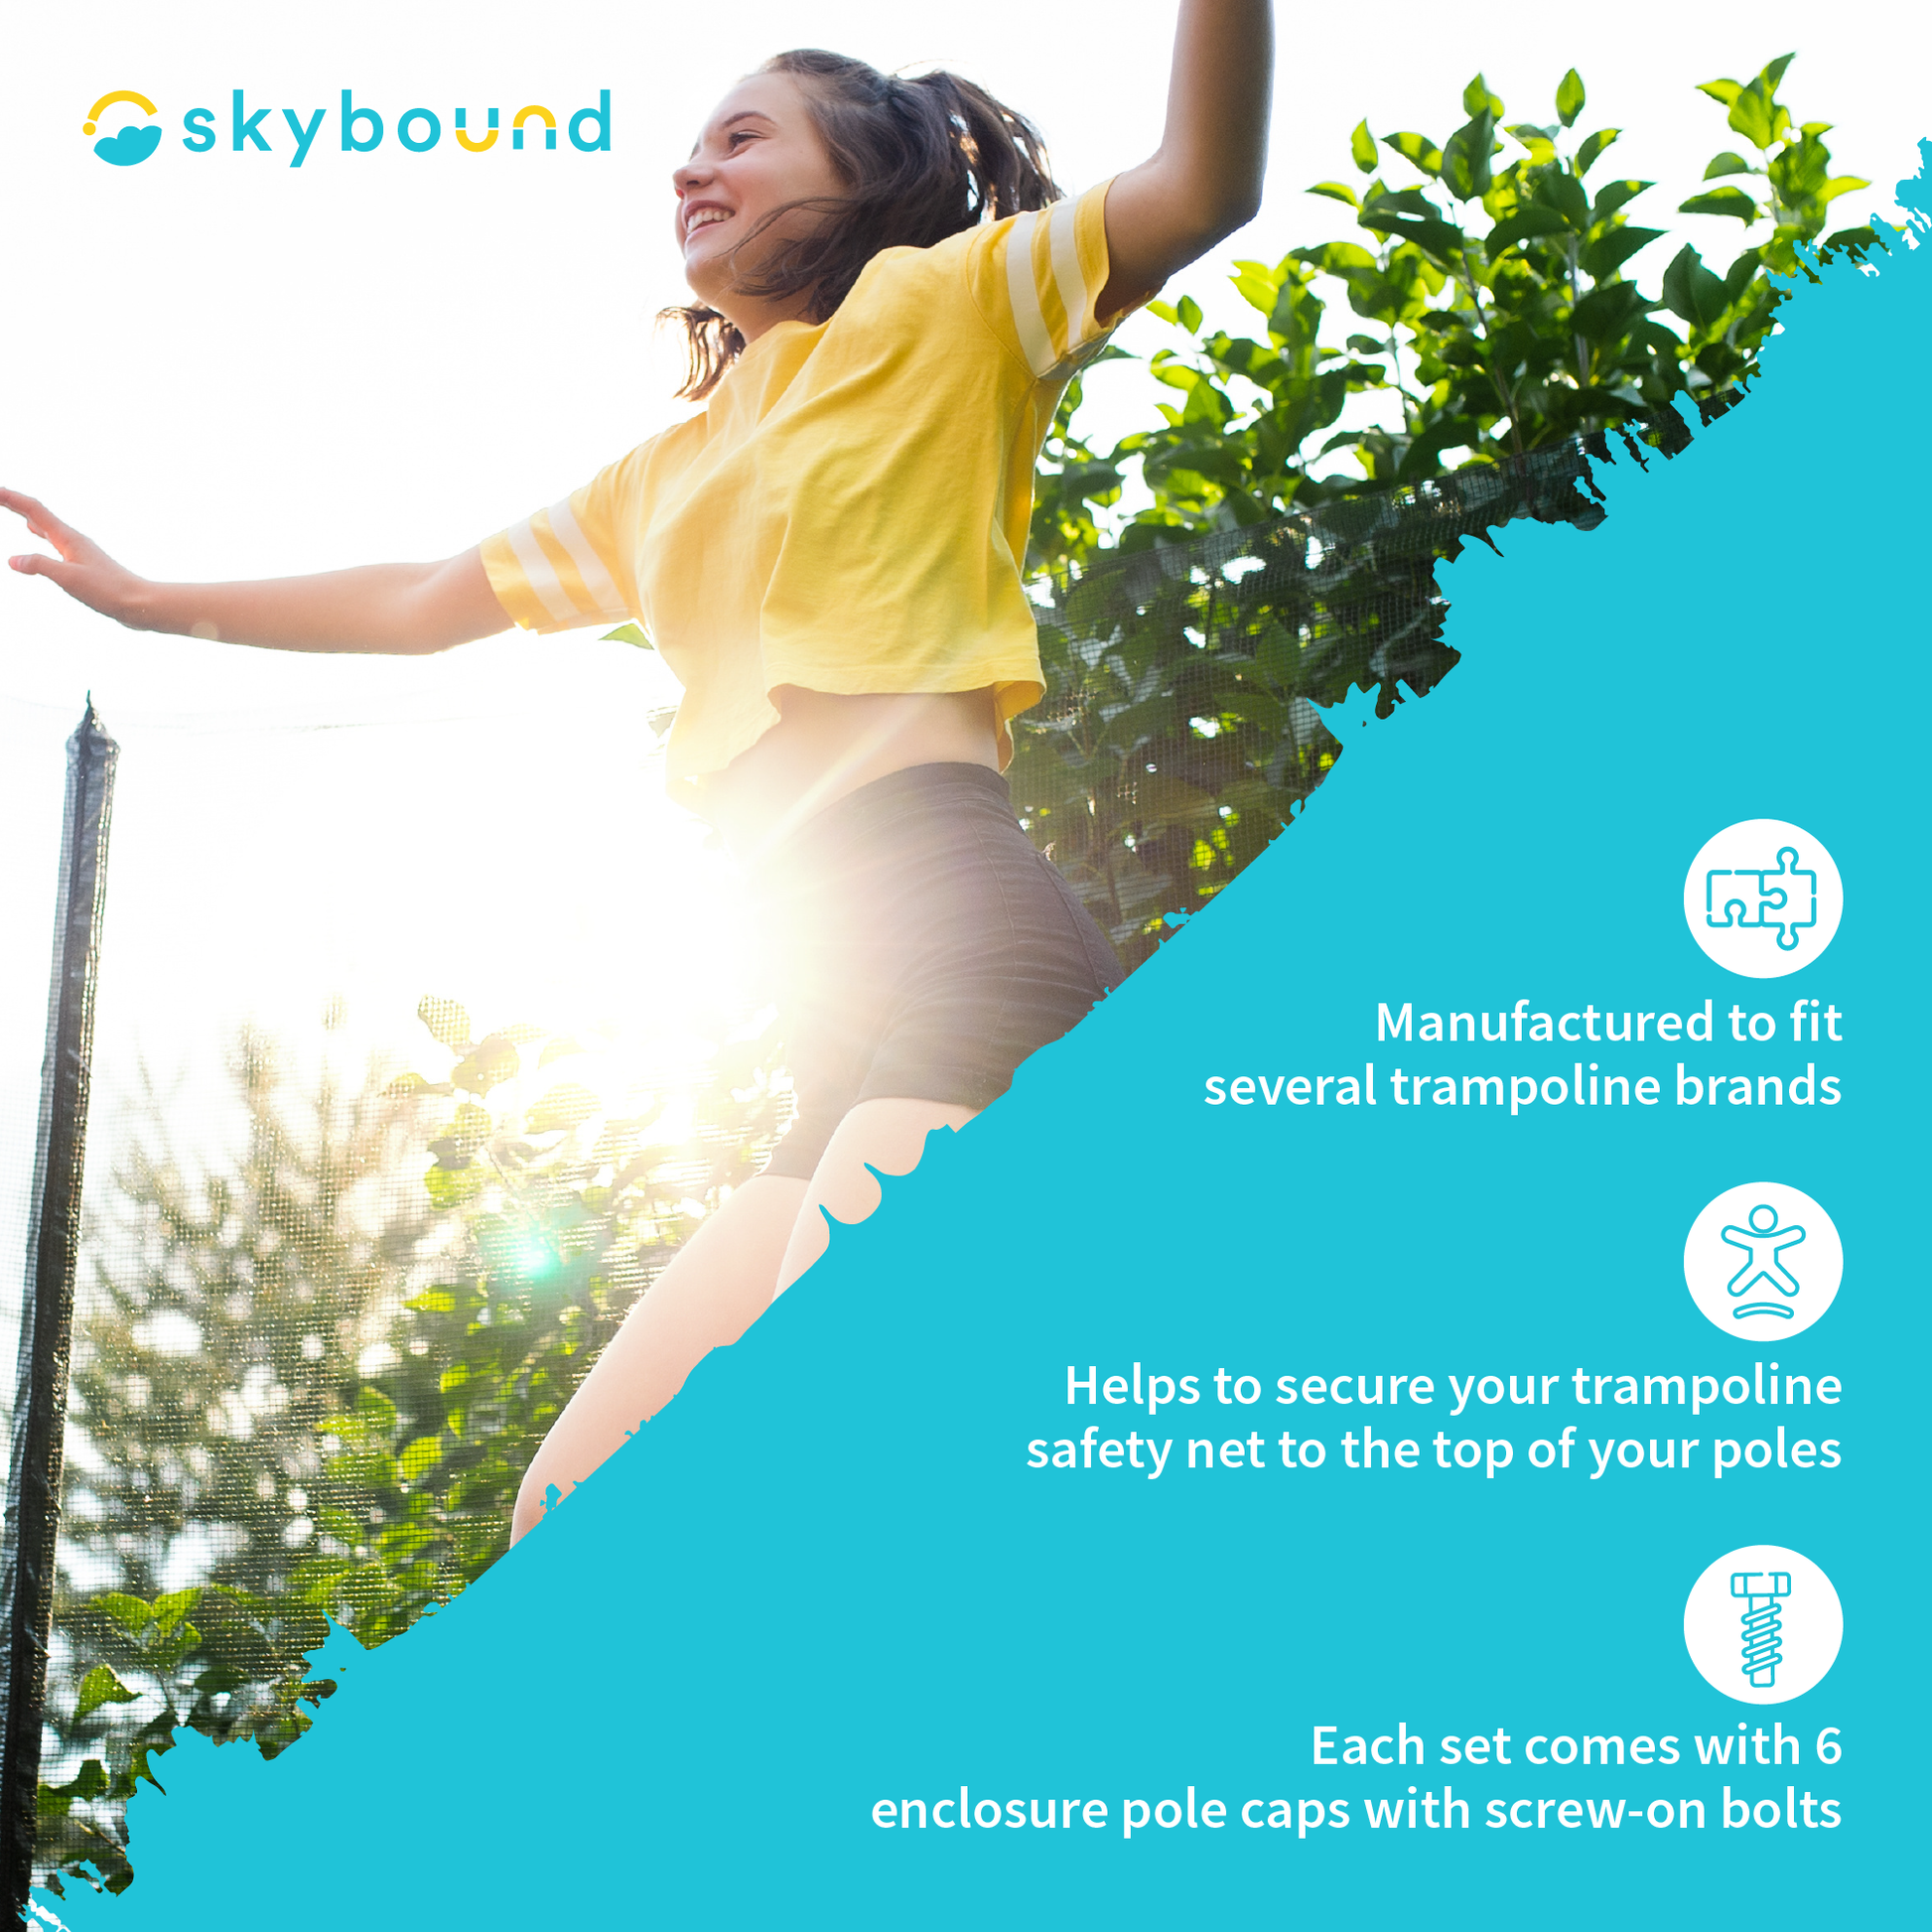 SkyBound: Products are manufactured to fit several trampoline brands. Helps to secure your trampoline safety net to the top of your poles. Each set comes with 6 enclosure pole caps with screw-on bolts.